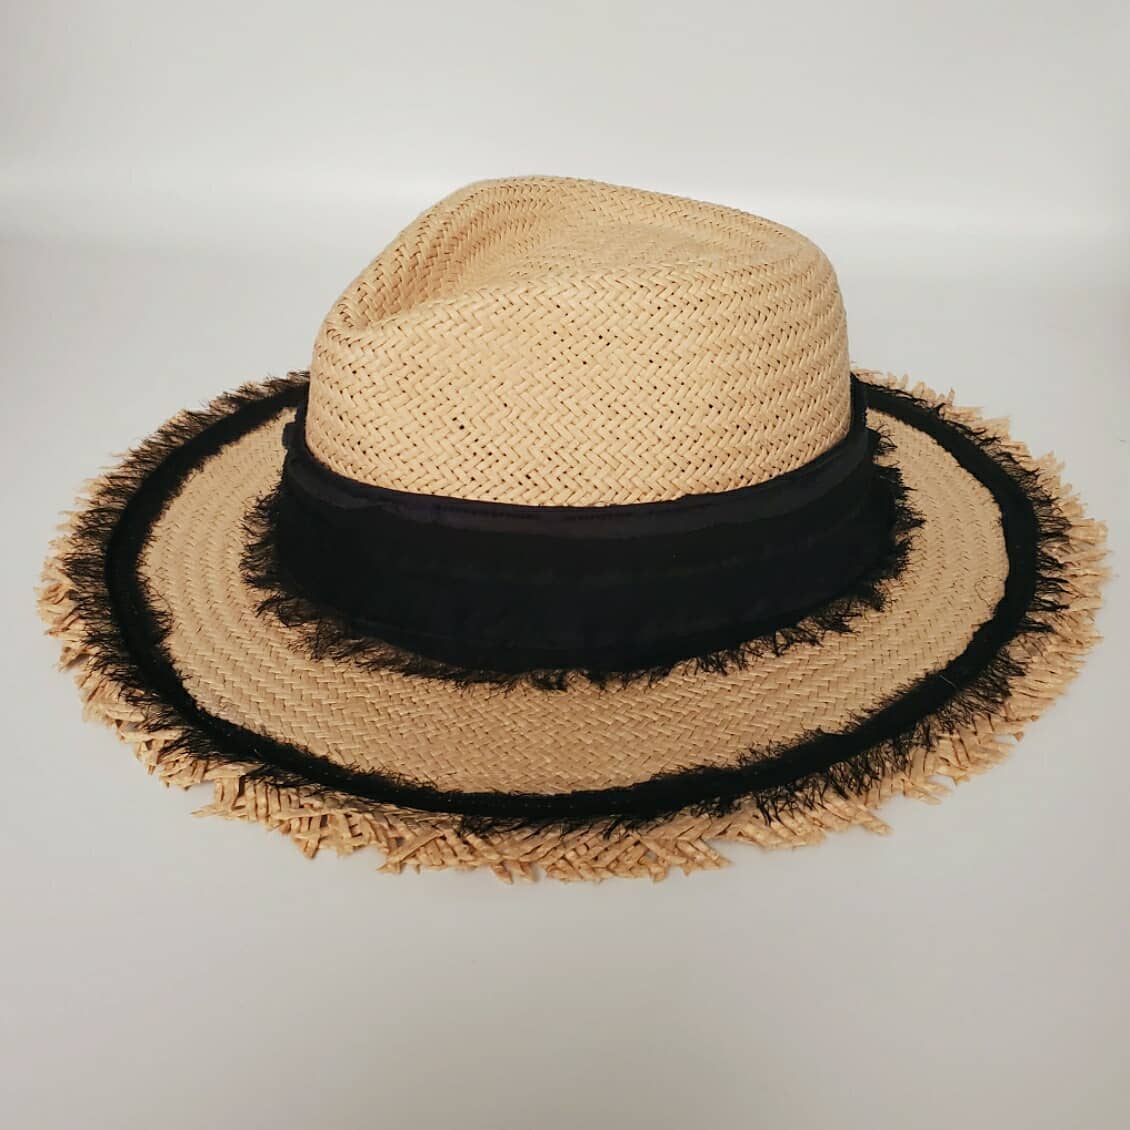 The Packable Custom Straw Beach Hat – WYLDAIRE